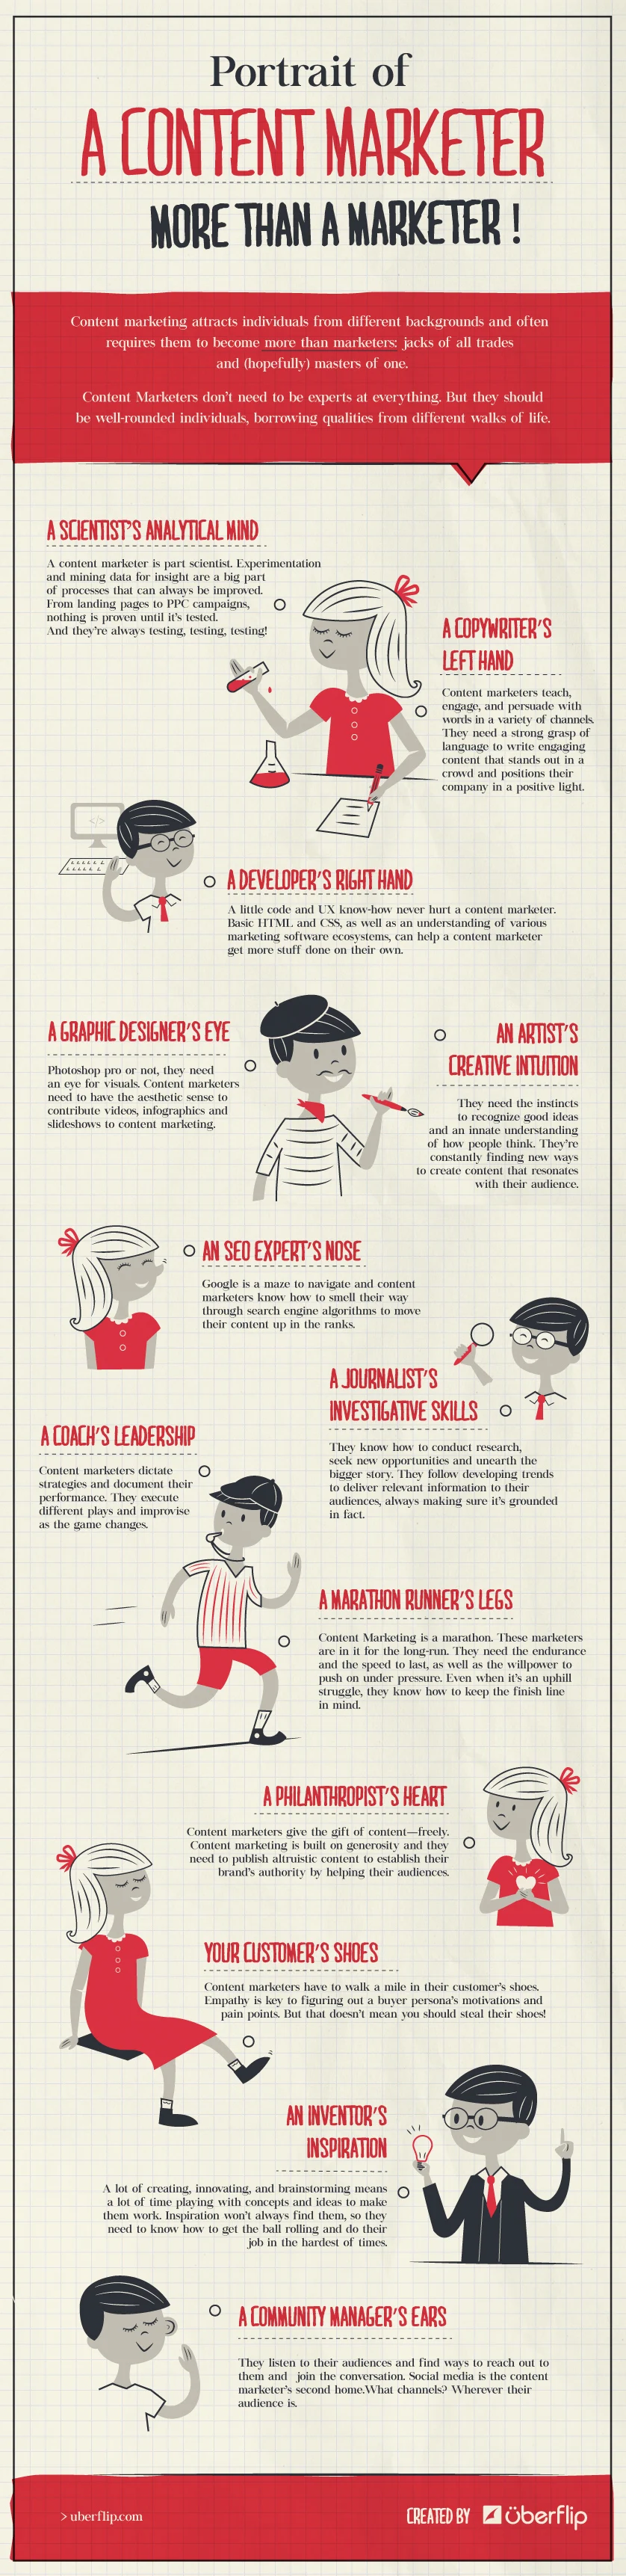 Portrait of a Content Marketer: More Than A Marketer - #Infographic